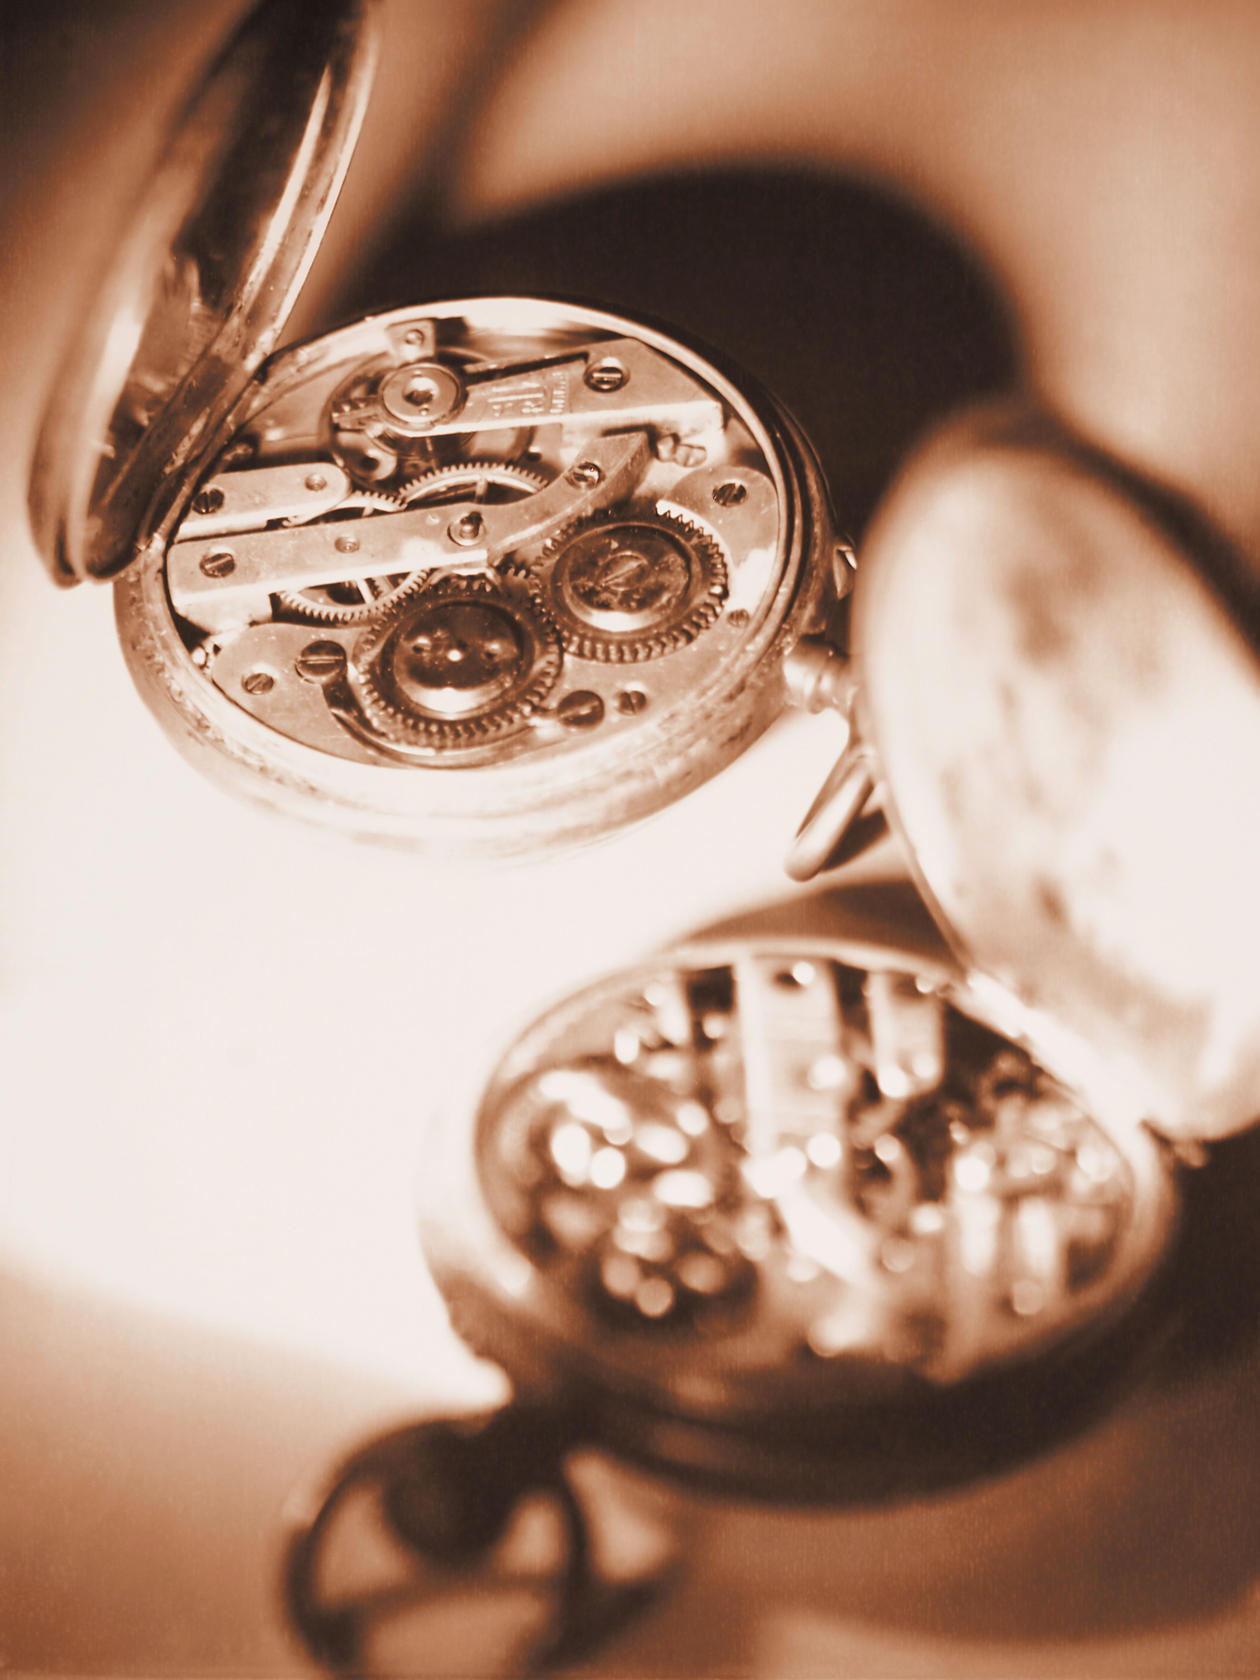 For watch collectors, thebeauty and pride of a timepiece isin the complexity of its mechanics. Photo: www.imagesource.com